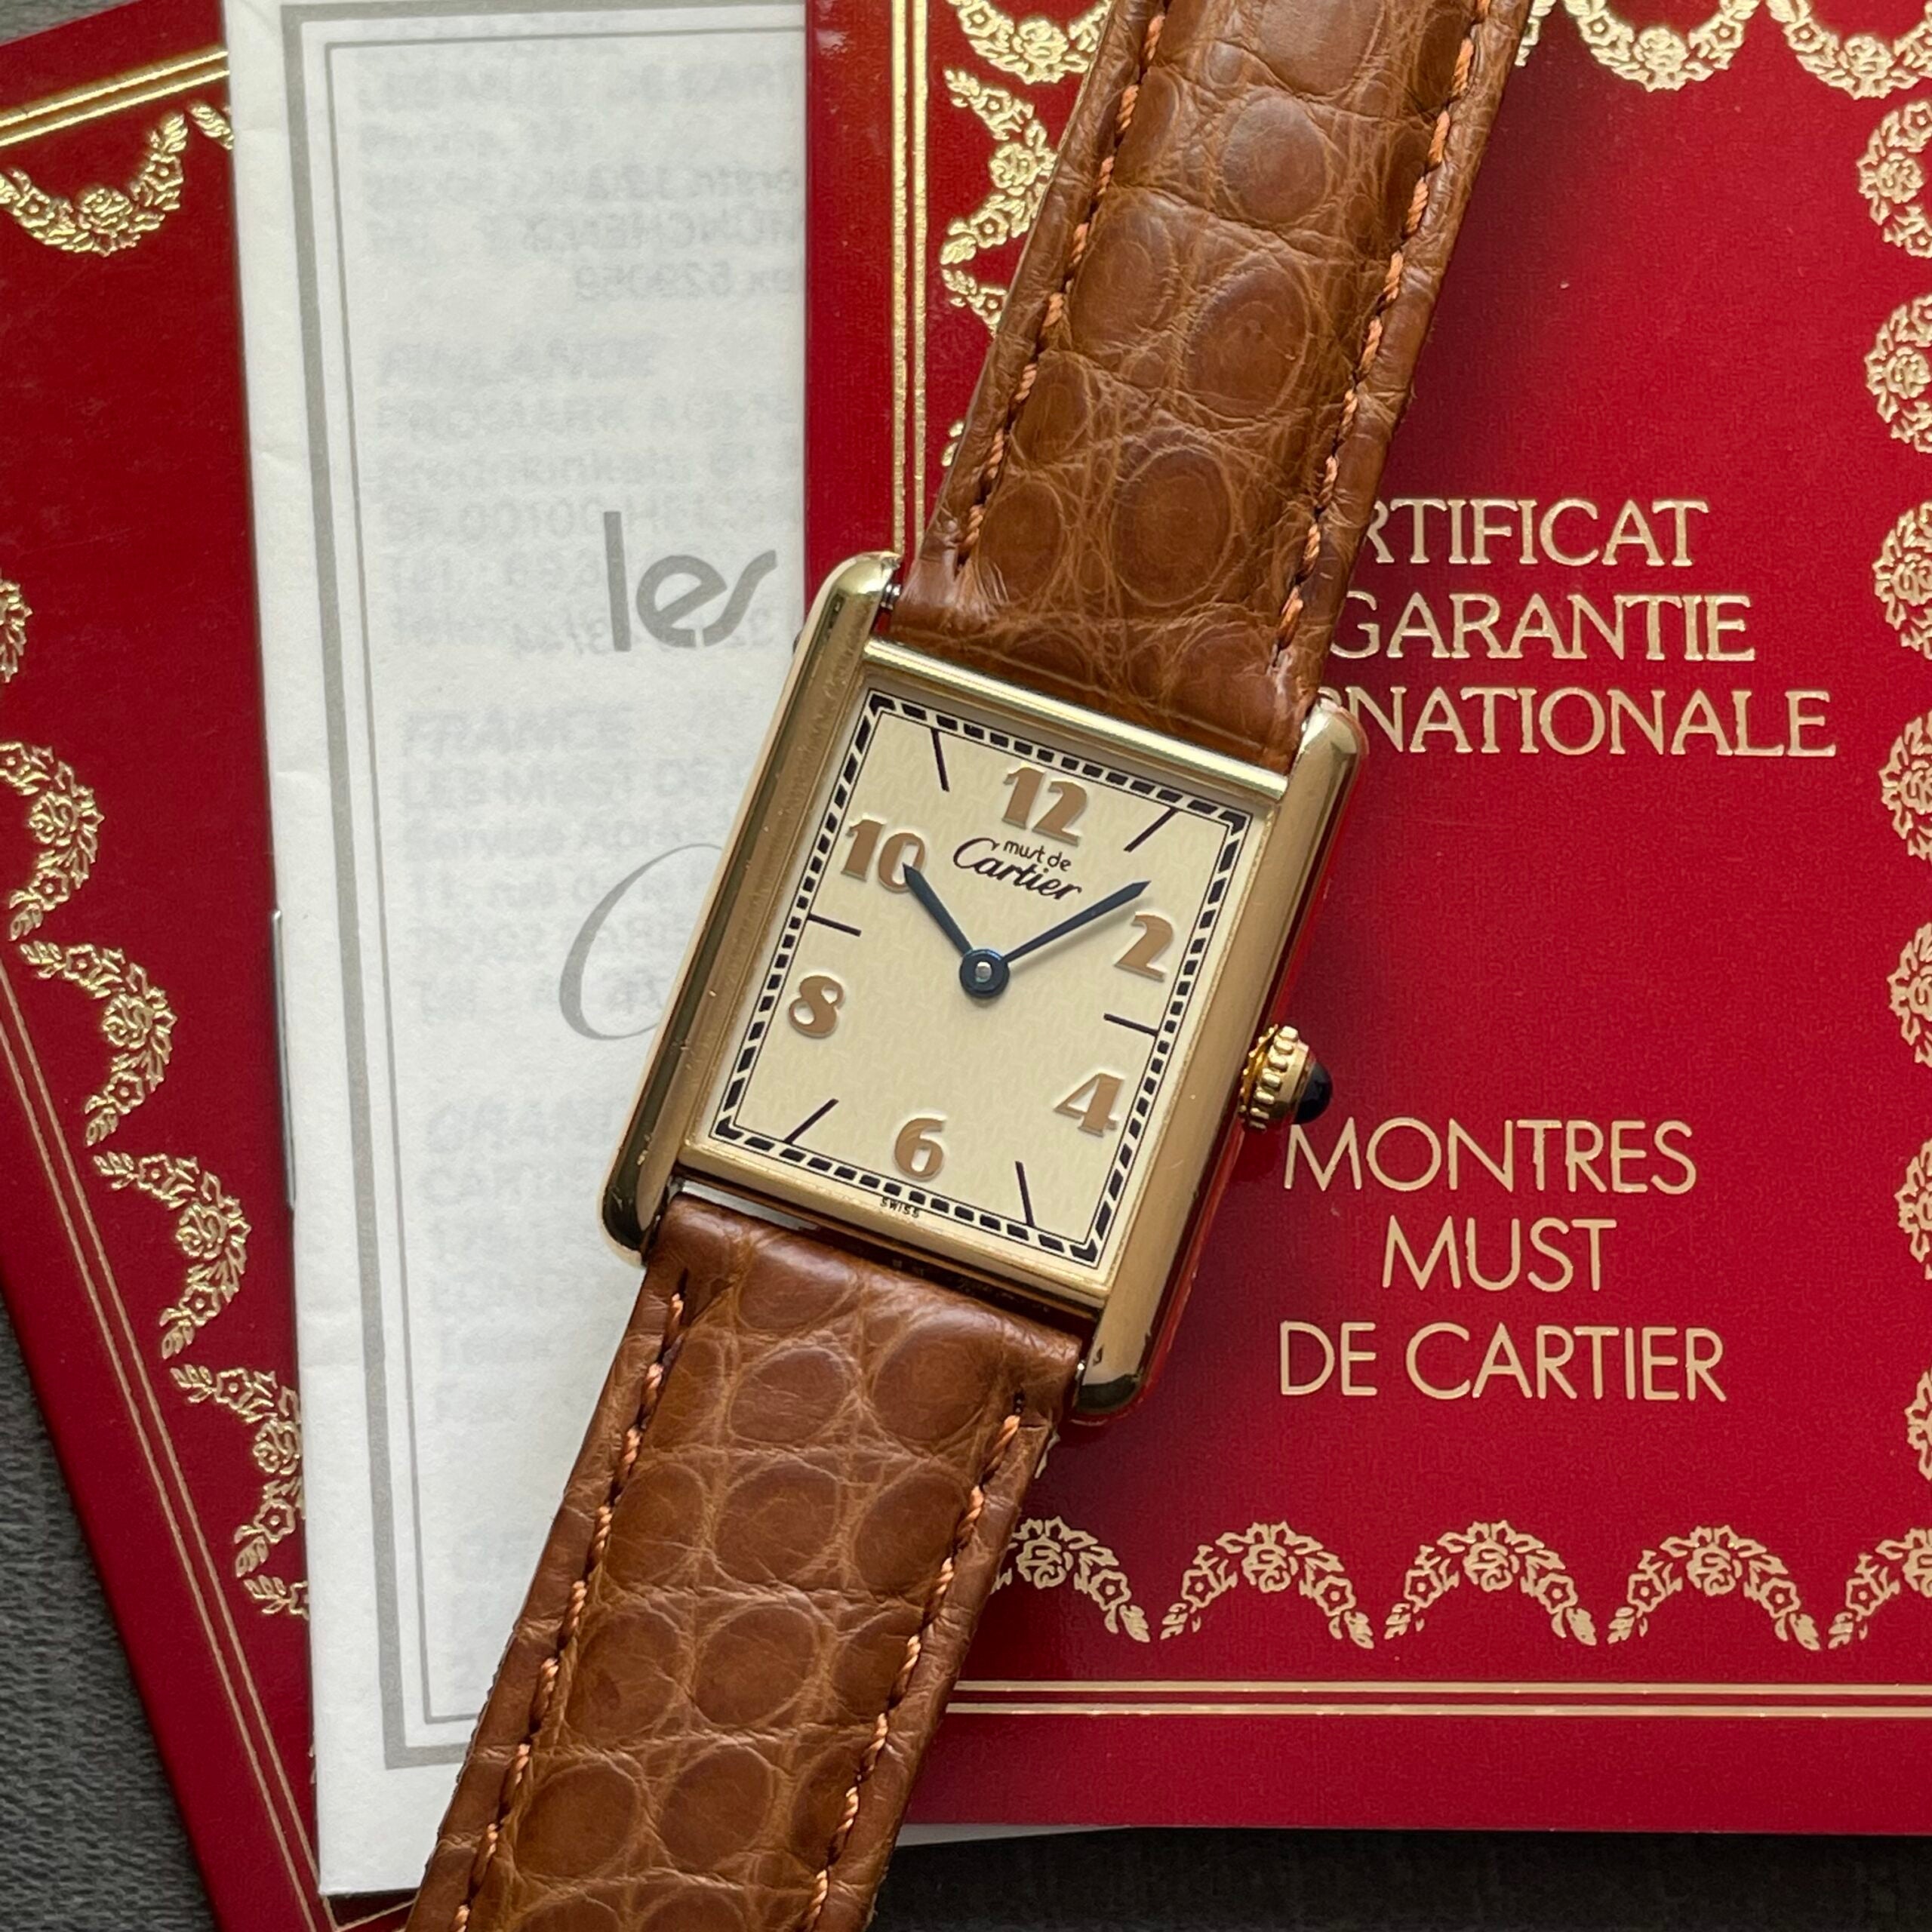 [Cartier] Mast tank LM flying Arabia accessories